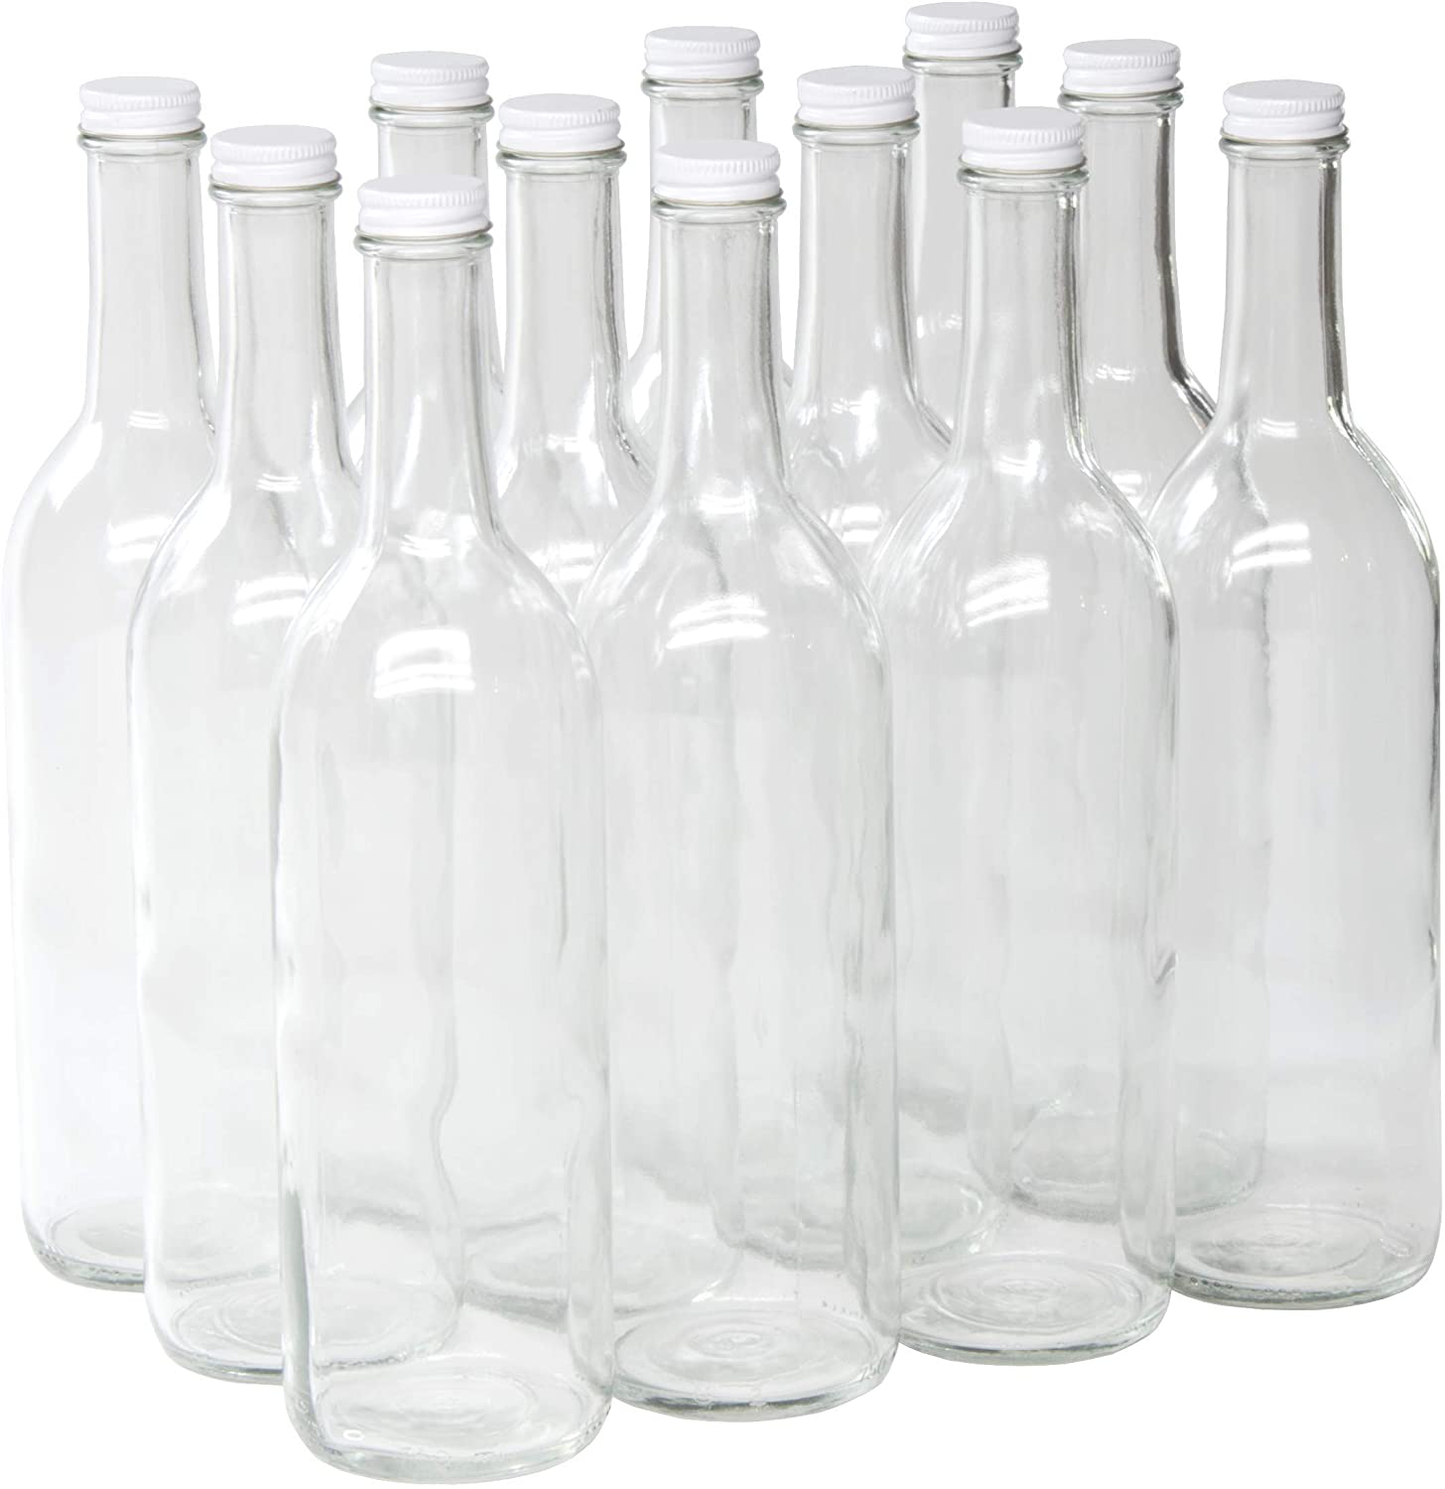 North Mountain Supply - W5CTCL-WT 750ml Clear Glass Bordeaux Wine Bottle Flat-Bottomed Screw-Top Finish (White Metal Lids)